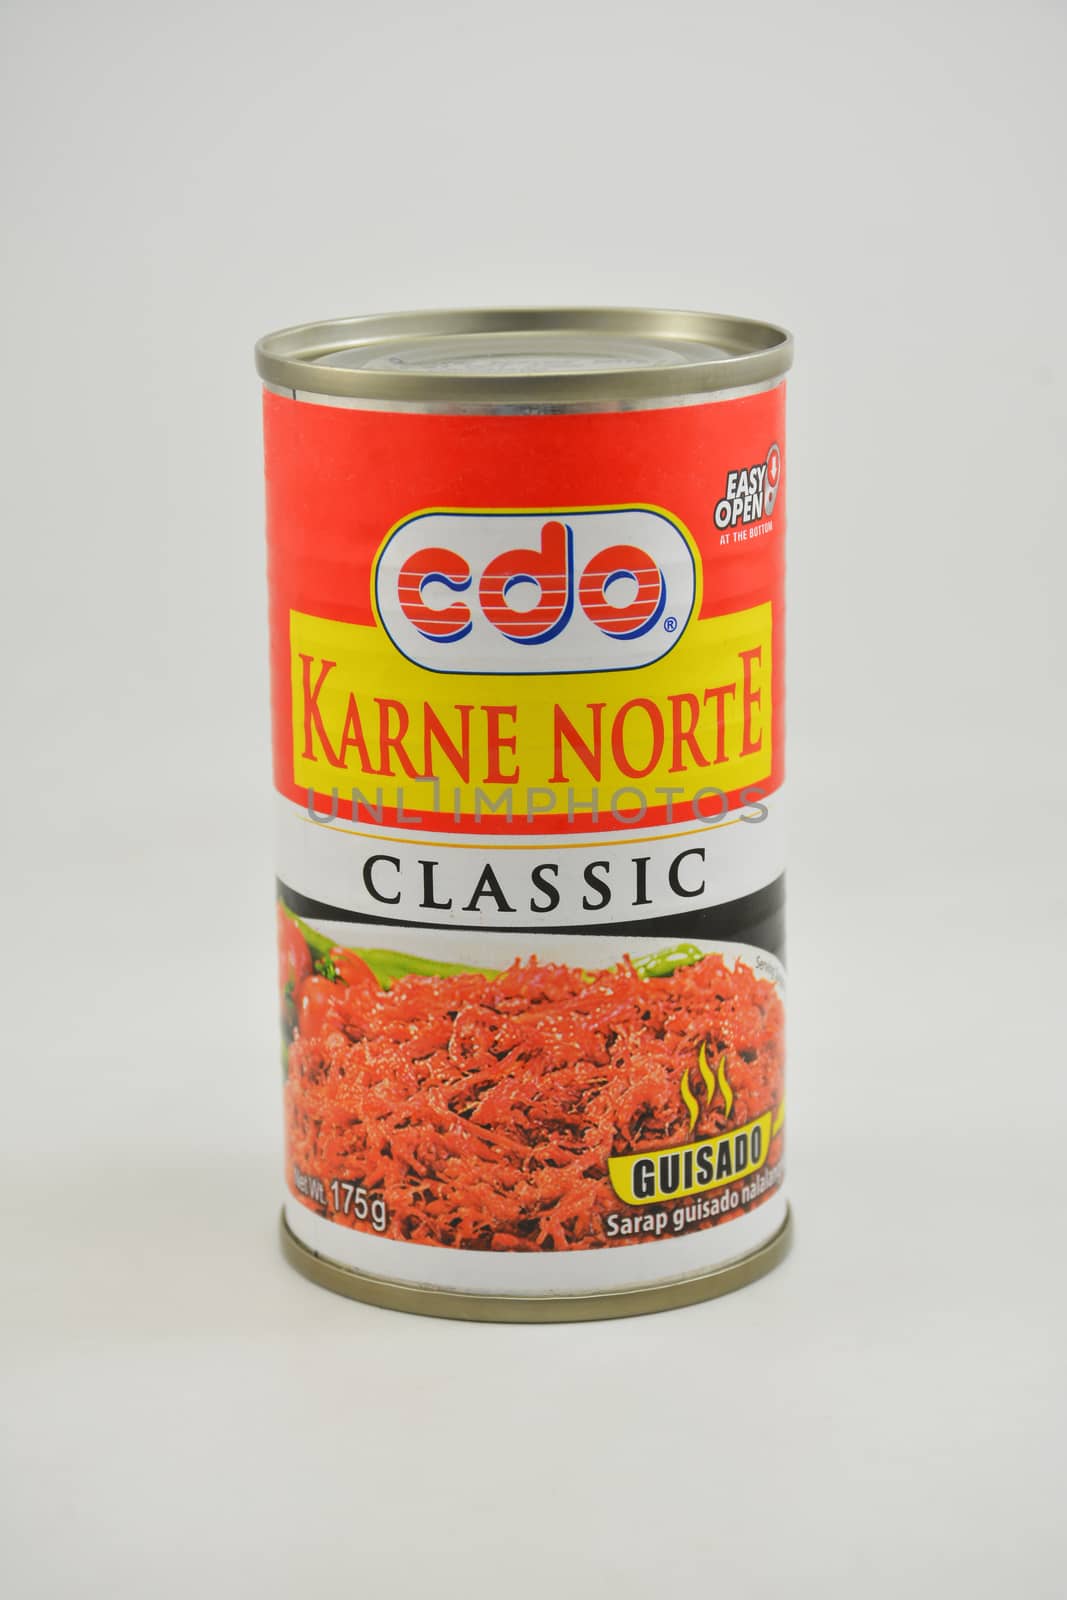 Cdo karne norte corned beef classic can in Manila, Philippines by imwaltersy